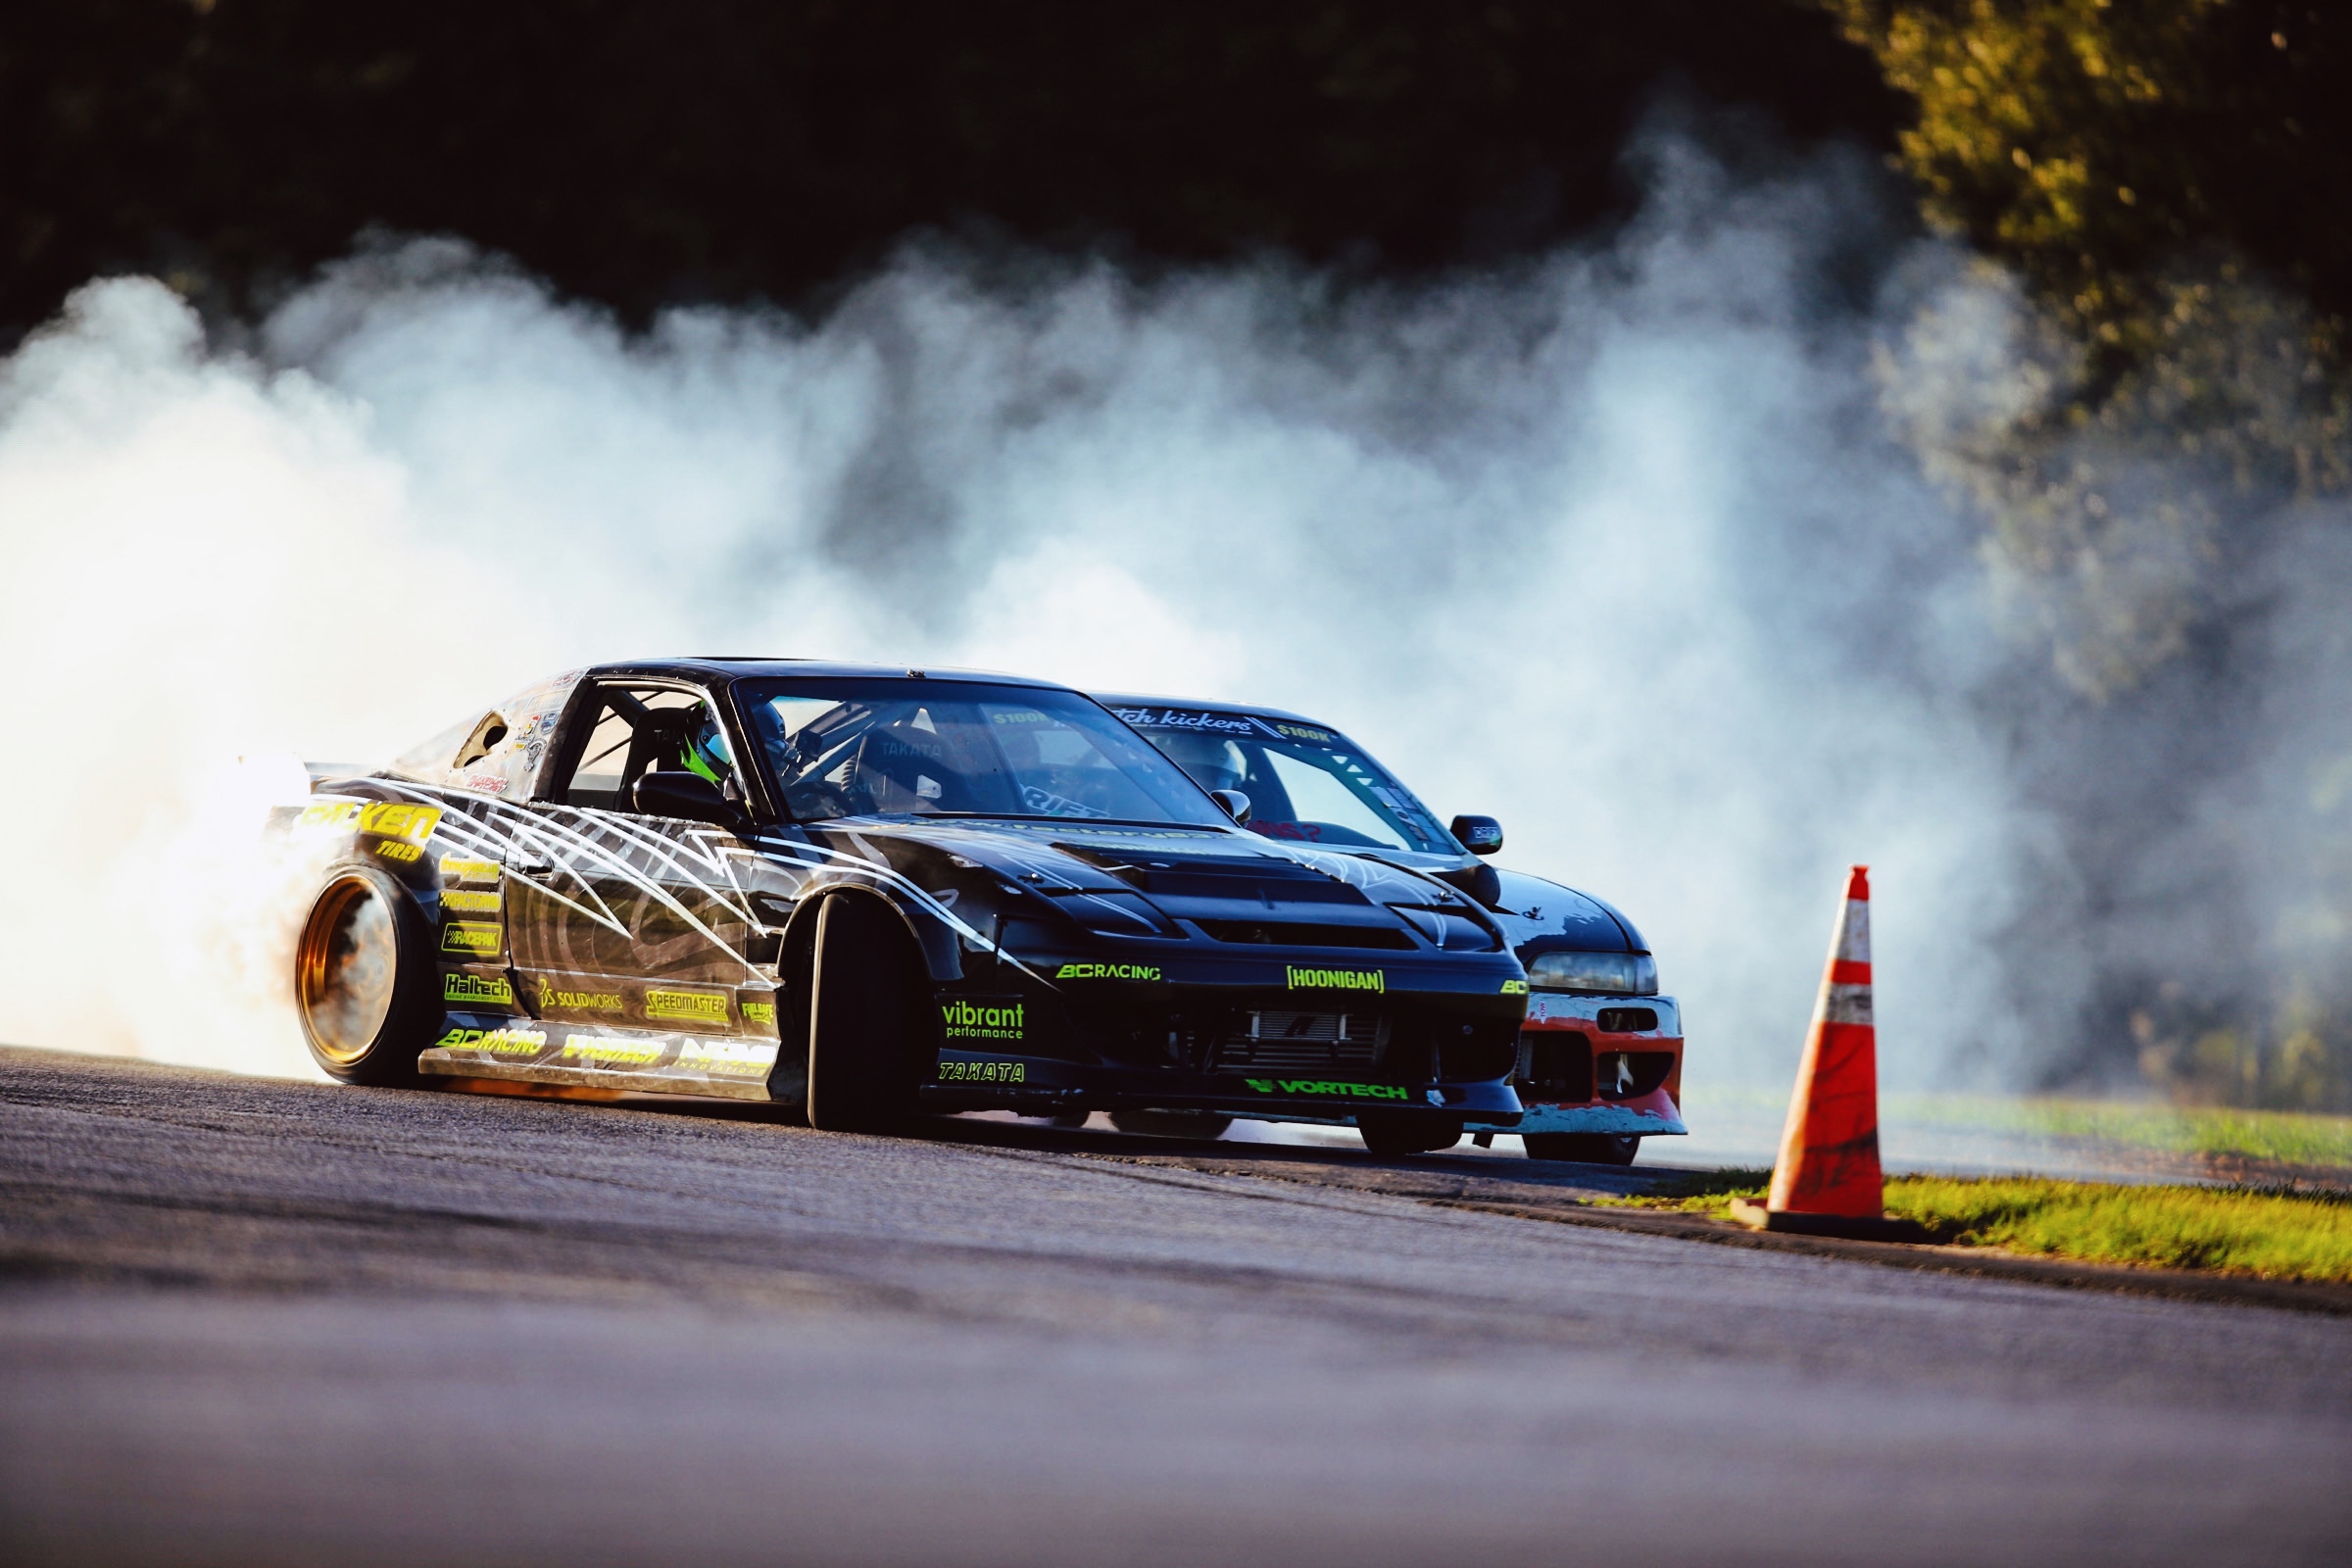 Designing a hand control system for an outstanding drift car